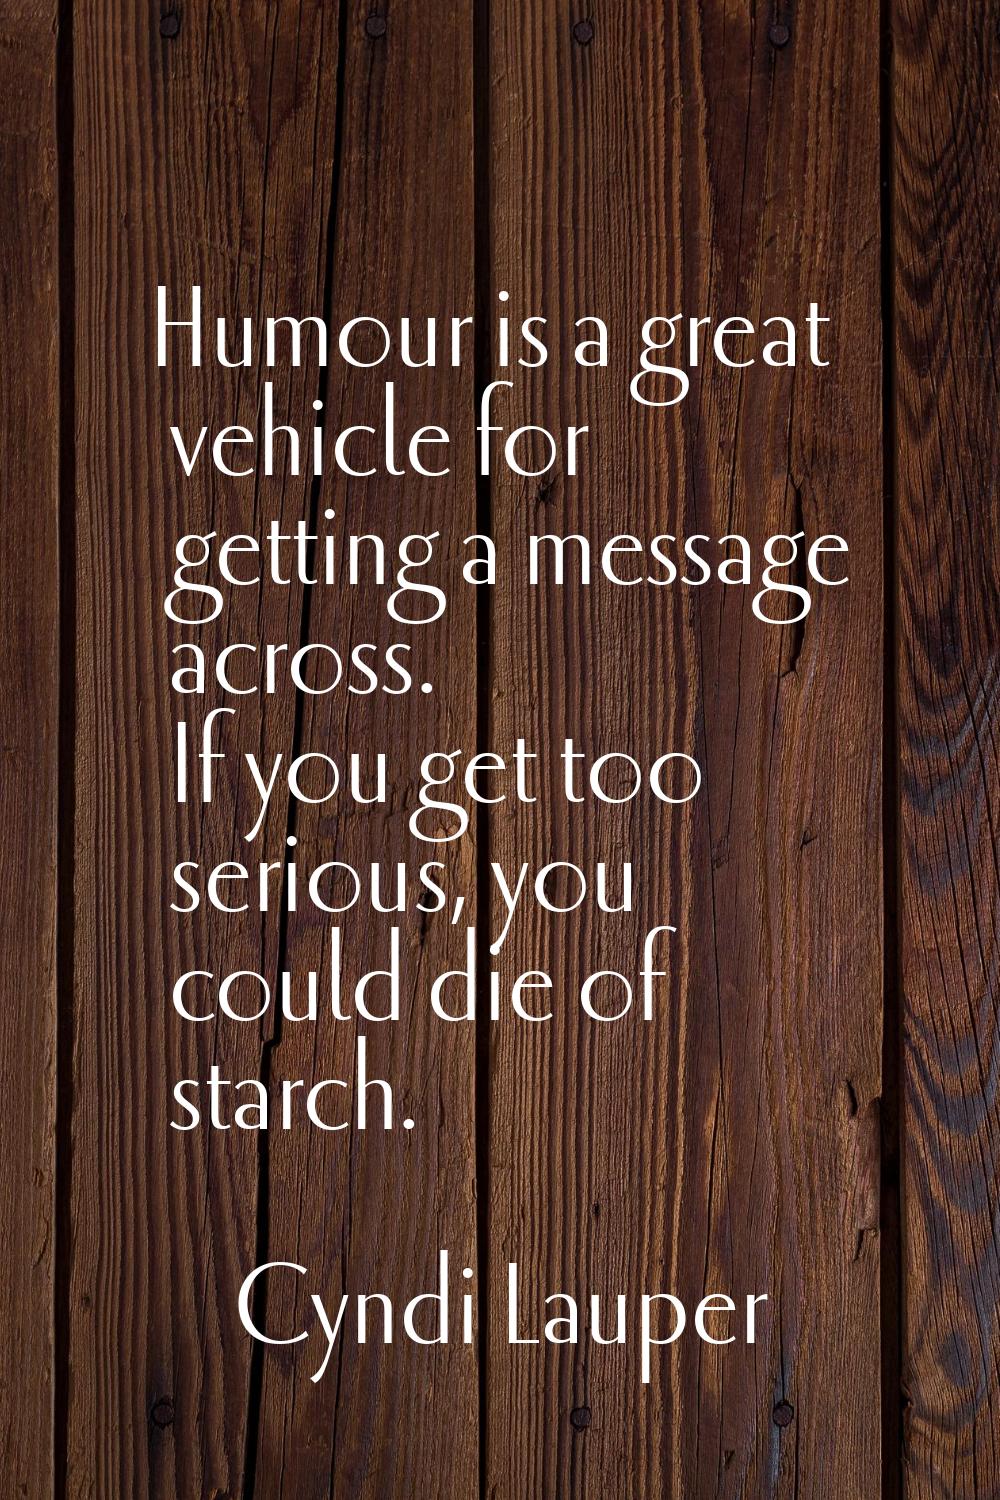 Humour is a great vehicle for getting a message across. If you get too serious, you could die of st